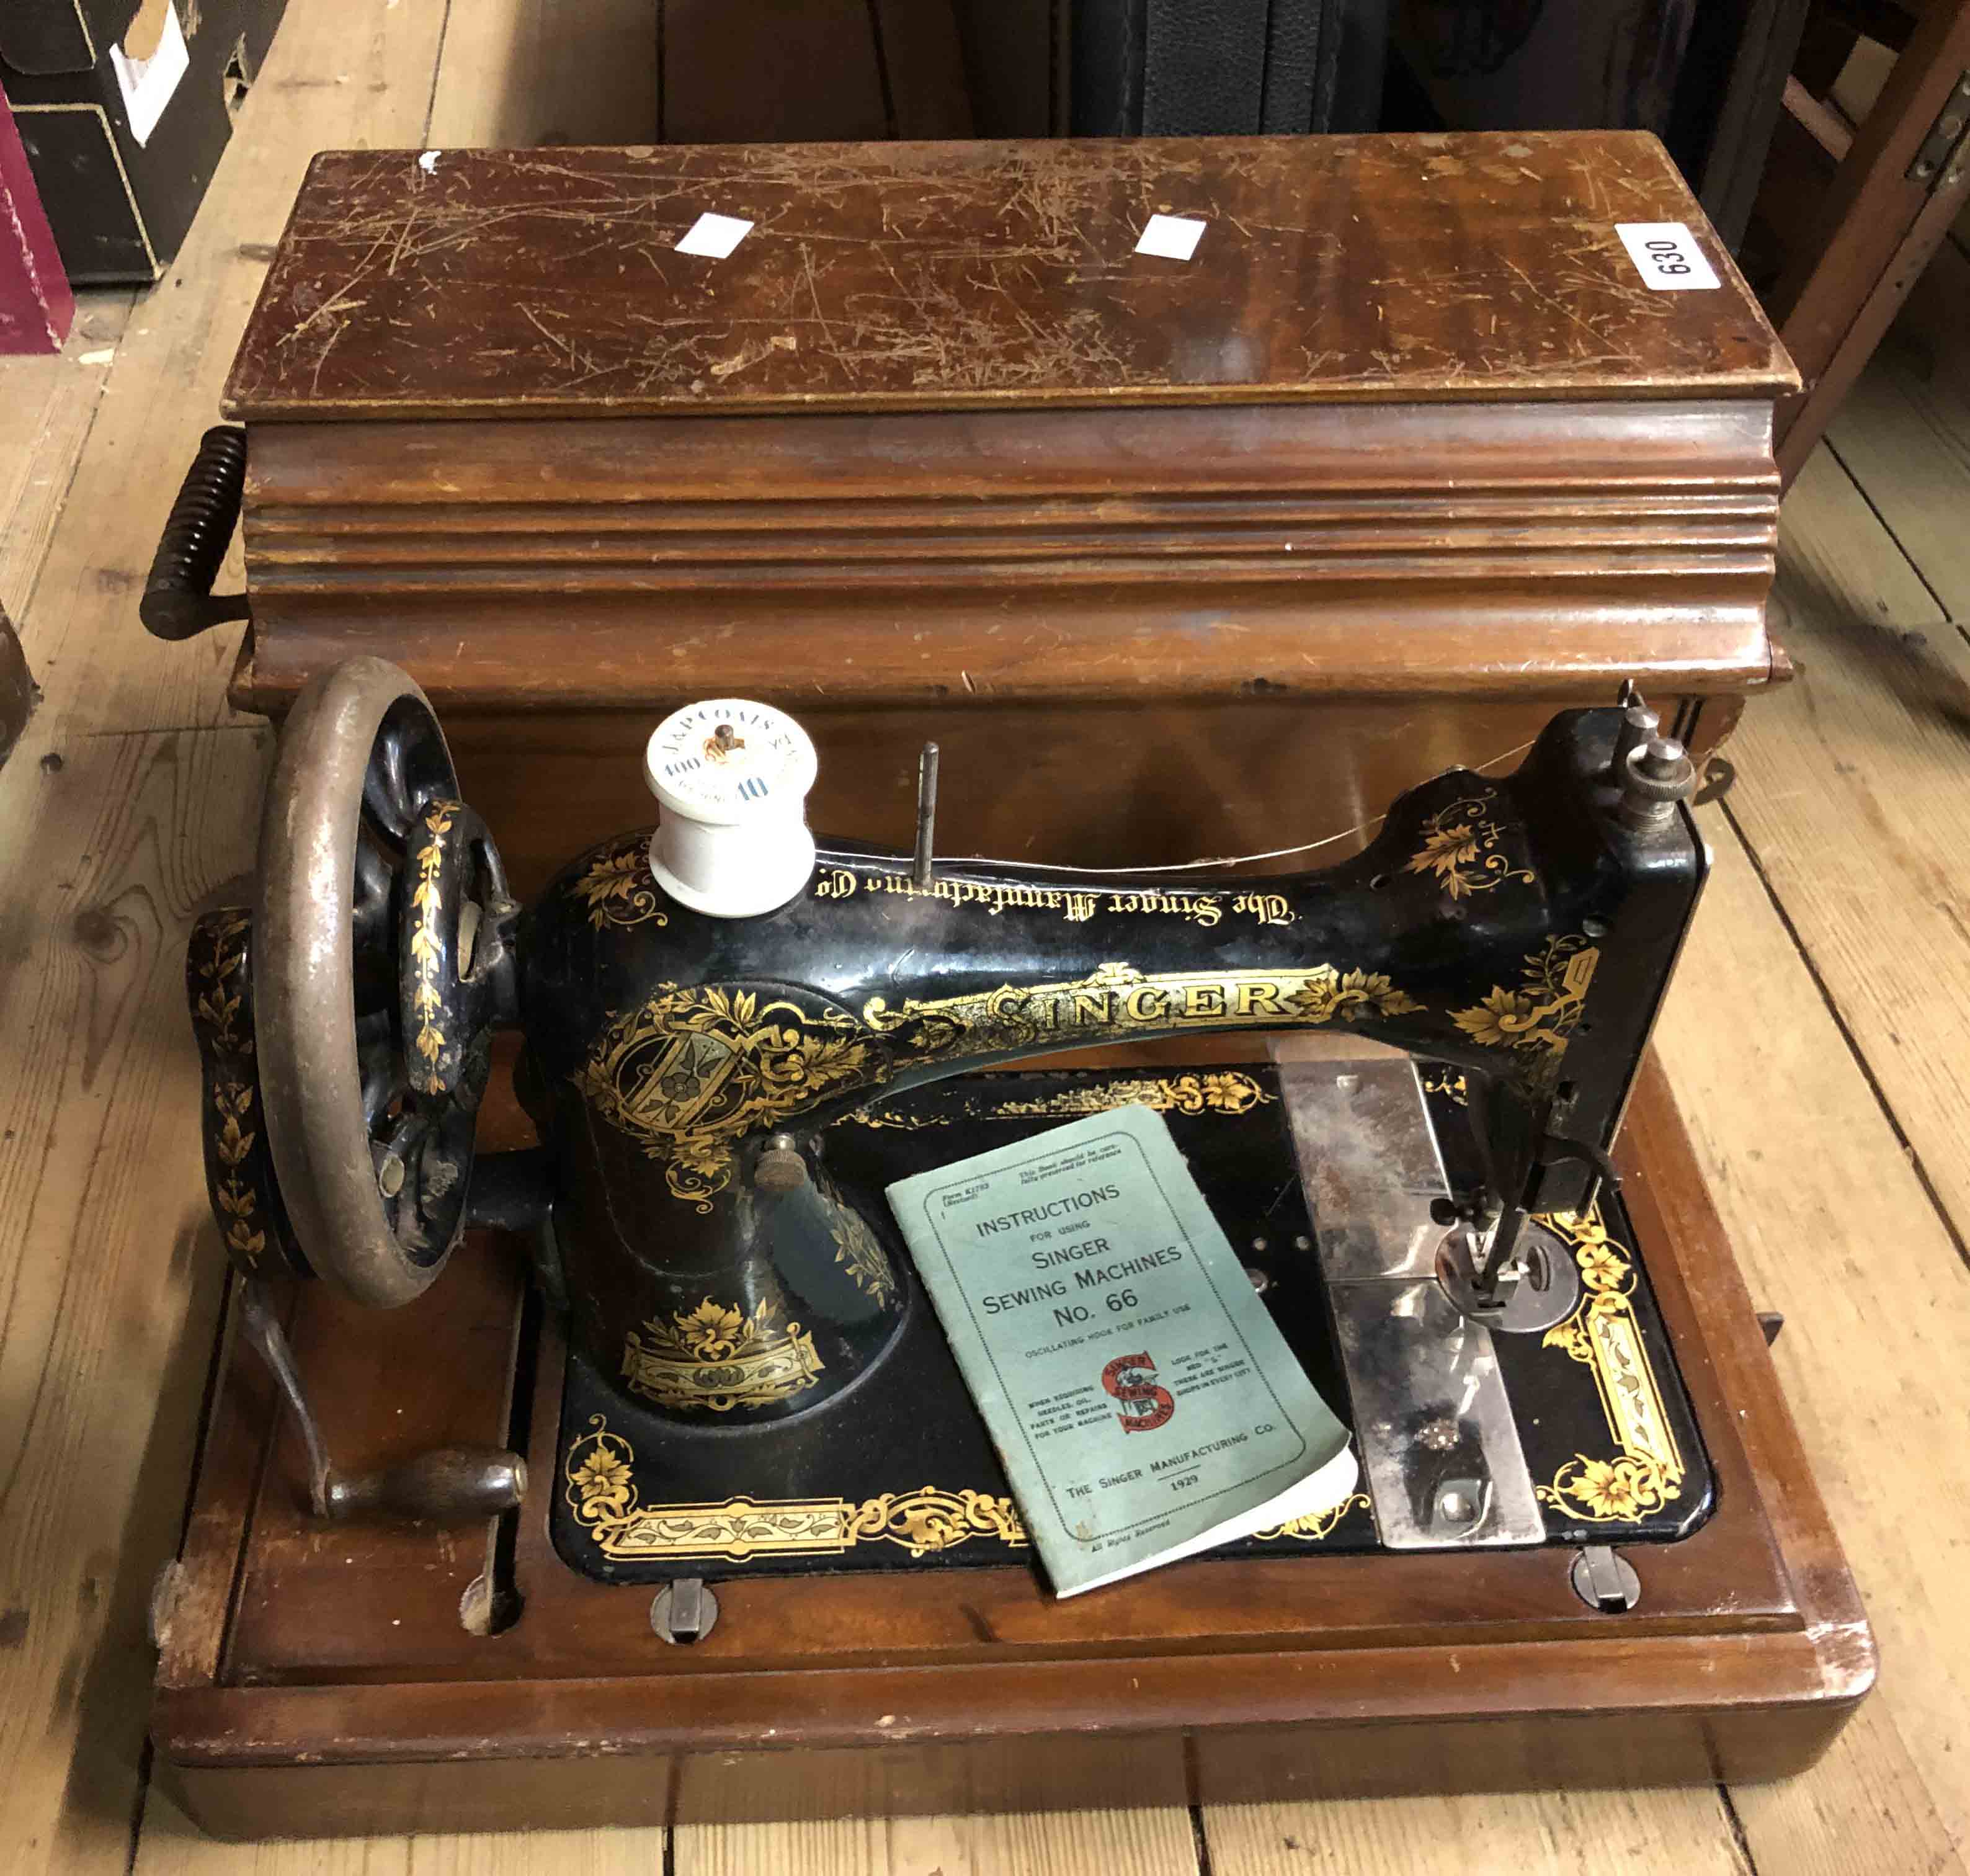 An old Singer sewing machine in wooden sarcophagus form case